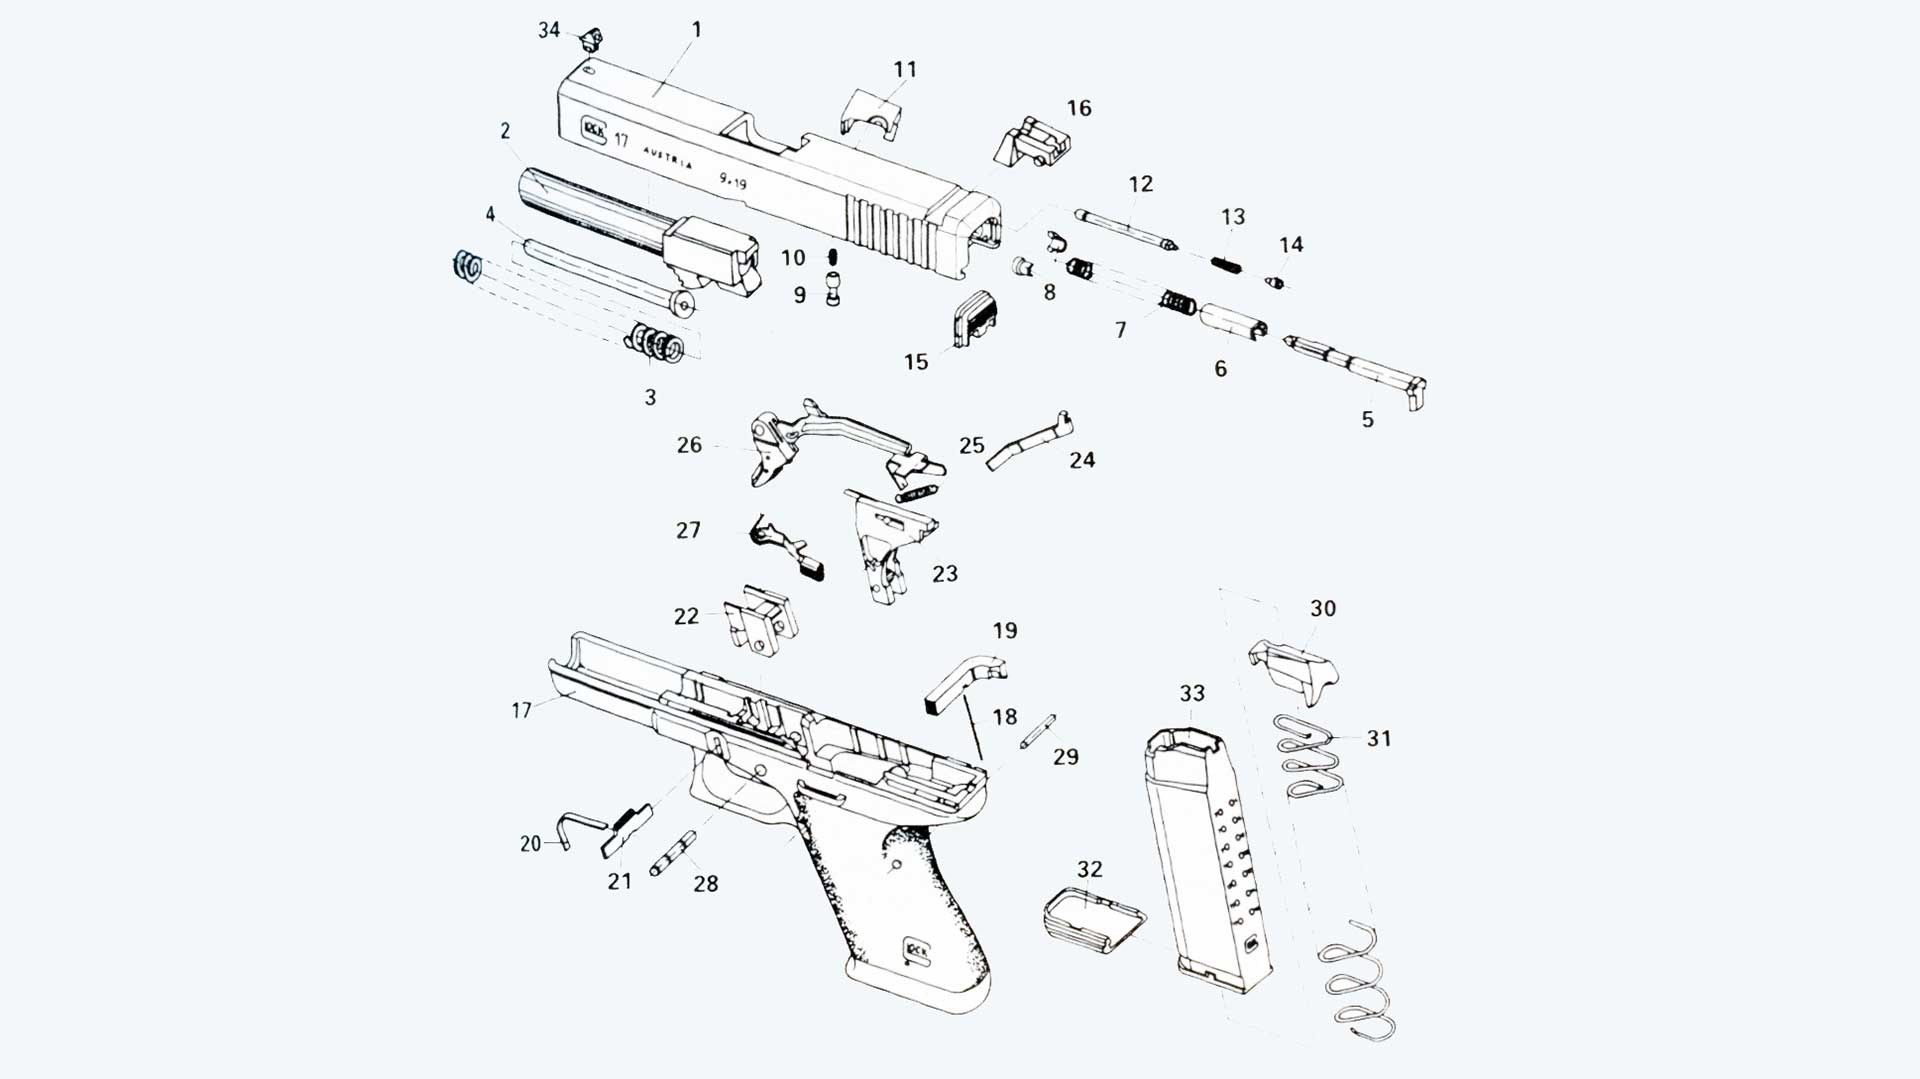 An exploded view of the Glock 17 pistol.